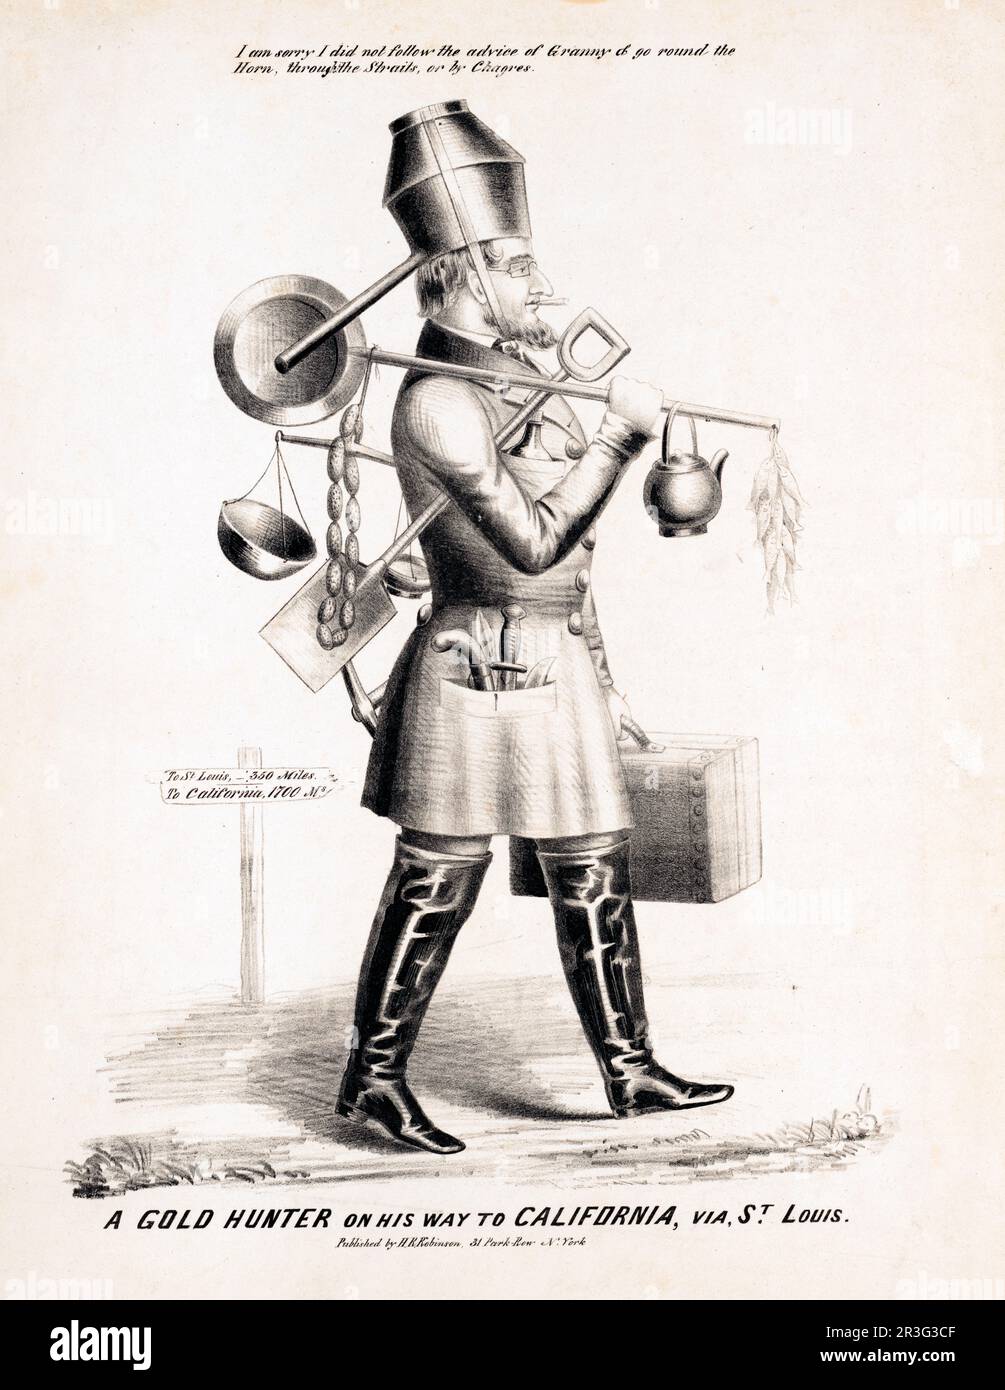 A gold hunter on his way to California, via St. Louis, depicting a man carrying a shovel, pans and a pick axe. Stock Photo